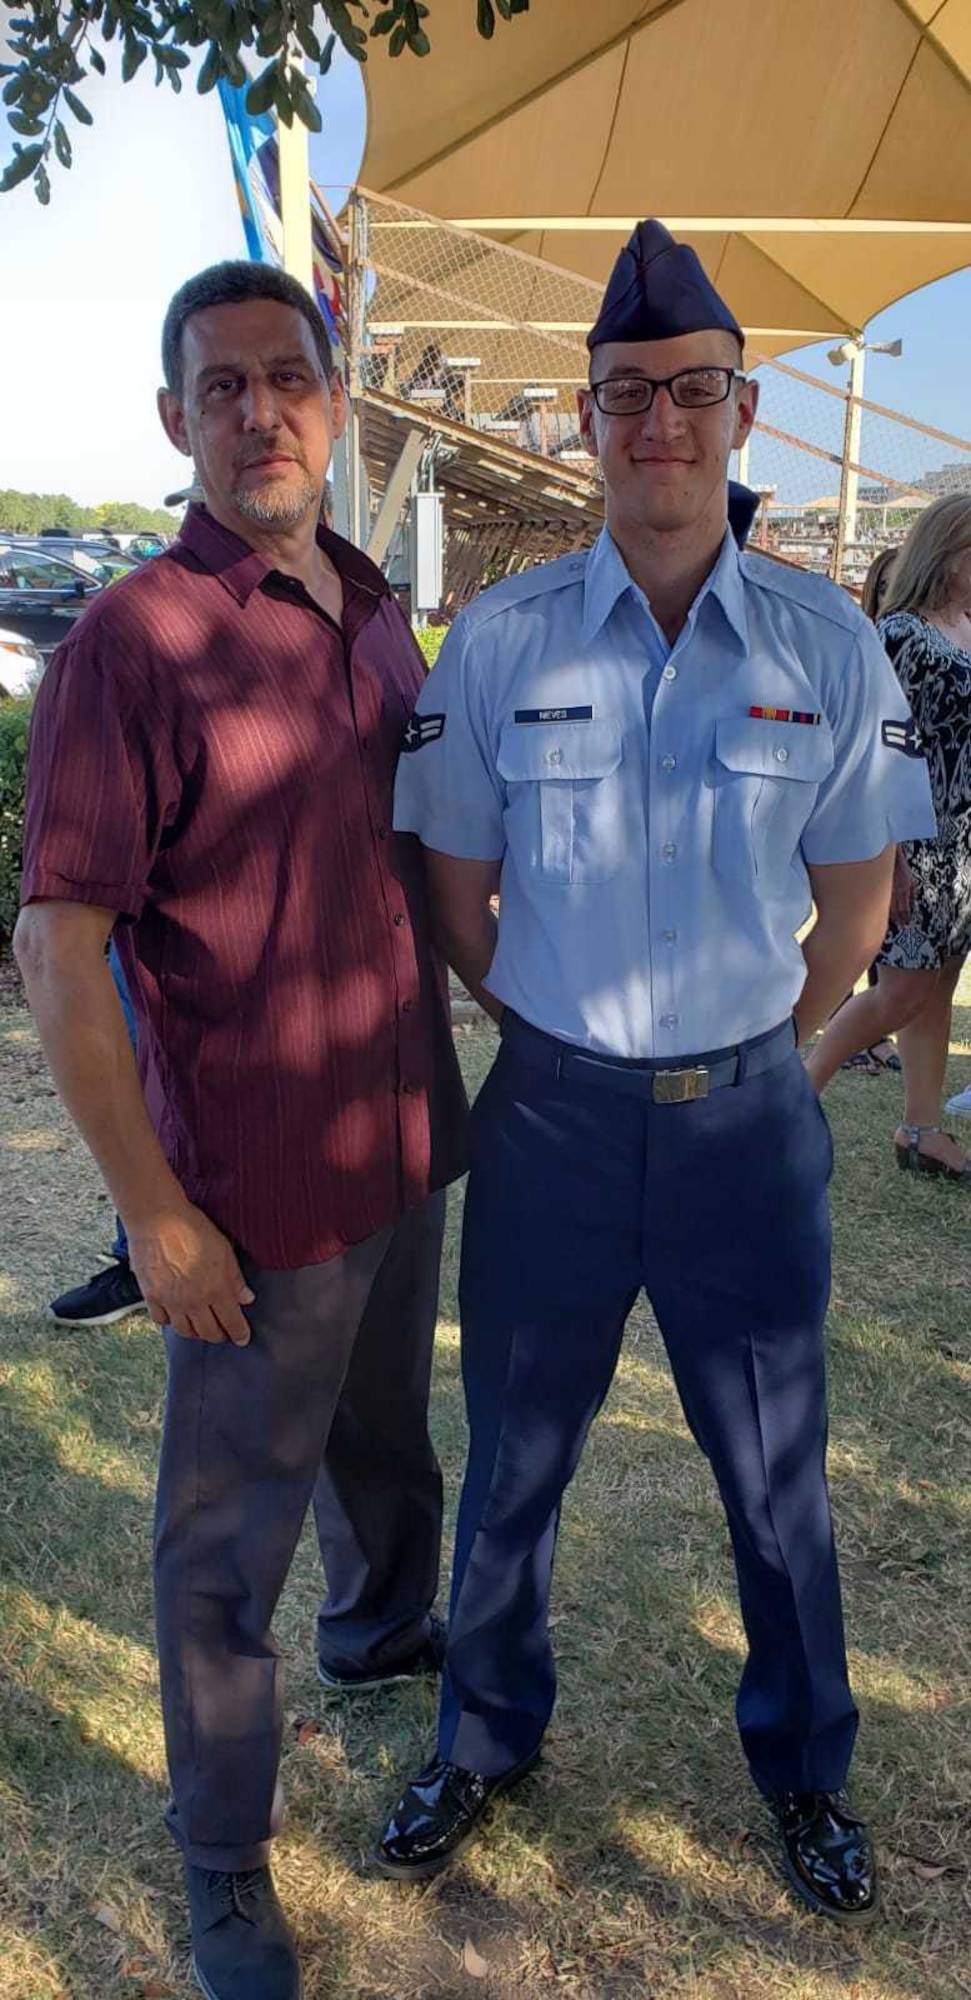 Airman 1st Class Isaiah A. Nieves, 2nd Maintenance Squadron aerospace ground equipment journeyman, stands with his father, Gonzalo Nieves, after his Basic Military Training graduation at Lackland Air Force Base, Texas. Nieves joined the Air Force in July 2019, and arrived at Barksdale in March 2020. (Courtesy photo)